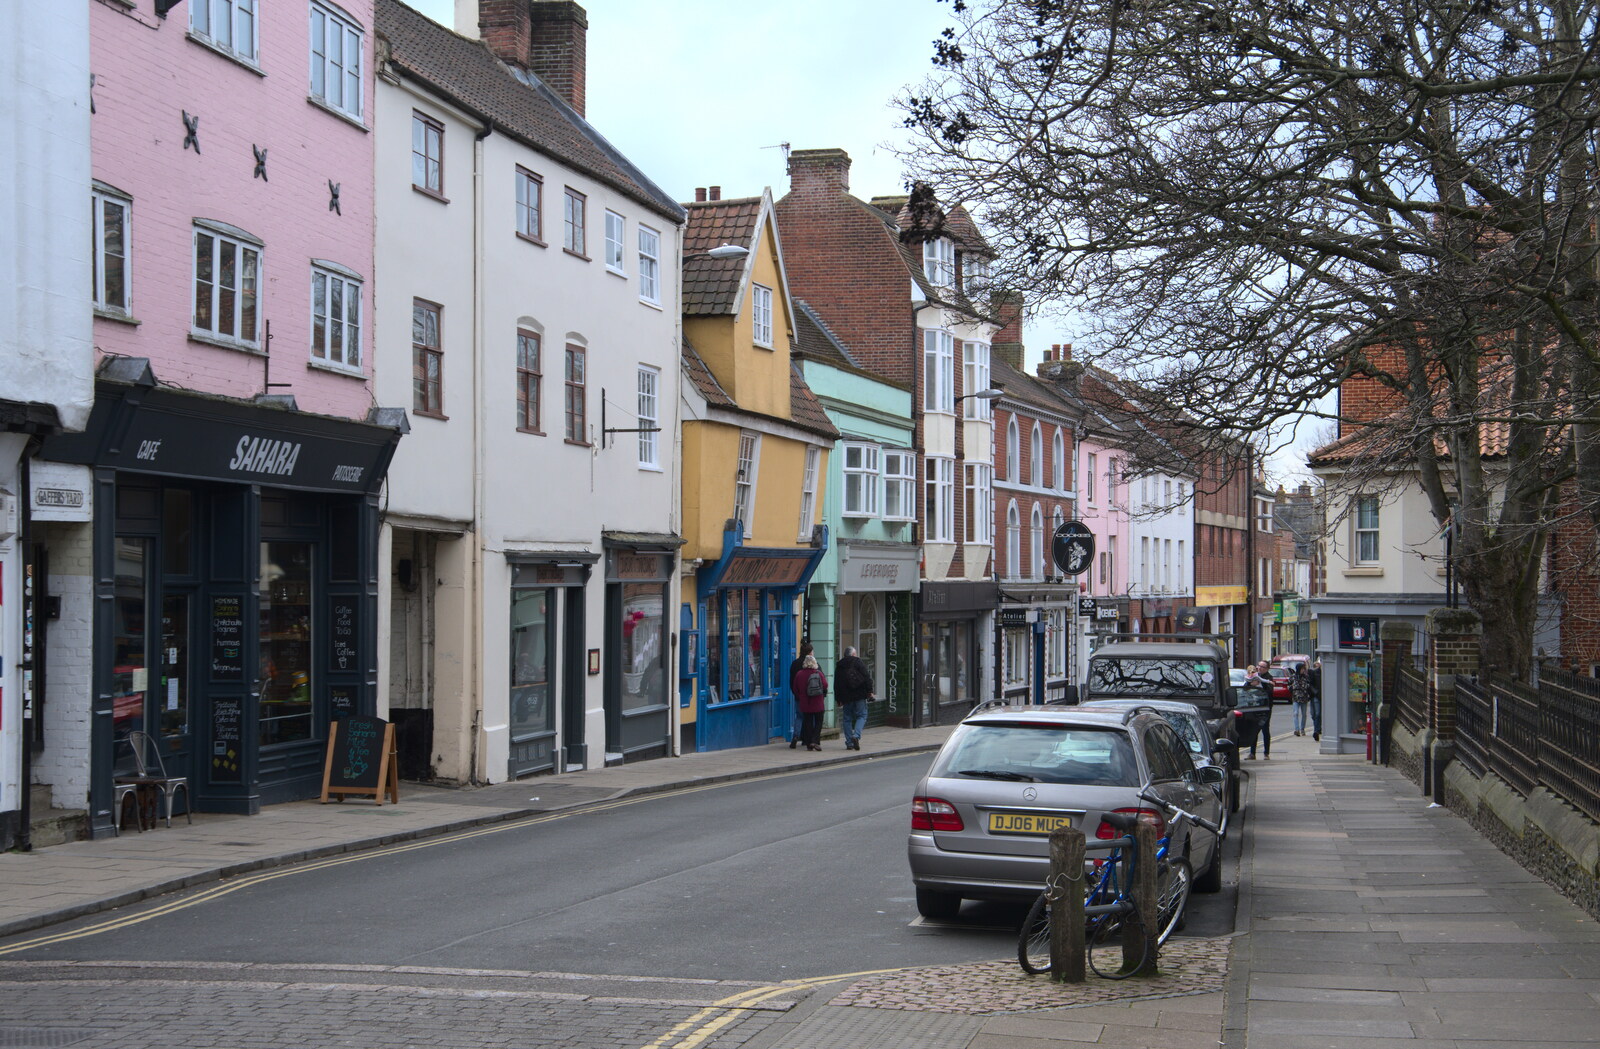 St. Benedict's Street from A Trip to Cooke's Music, St. Benedict's Street, Norwich - 14th March 2020